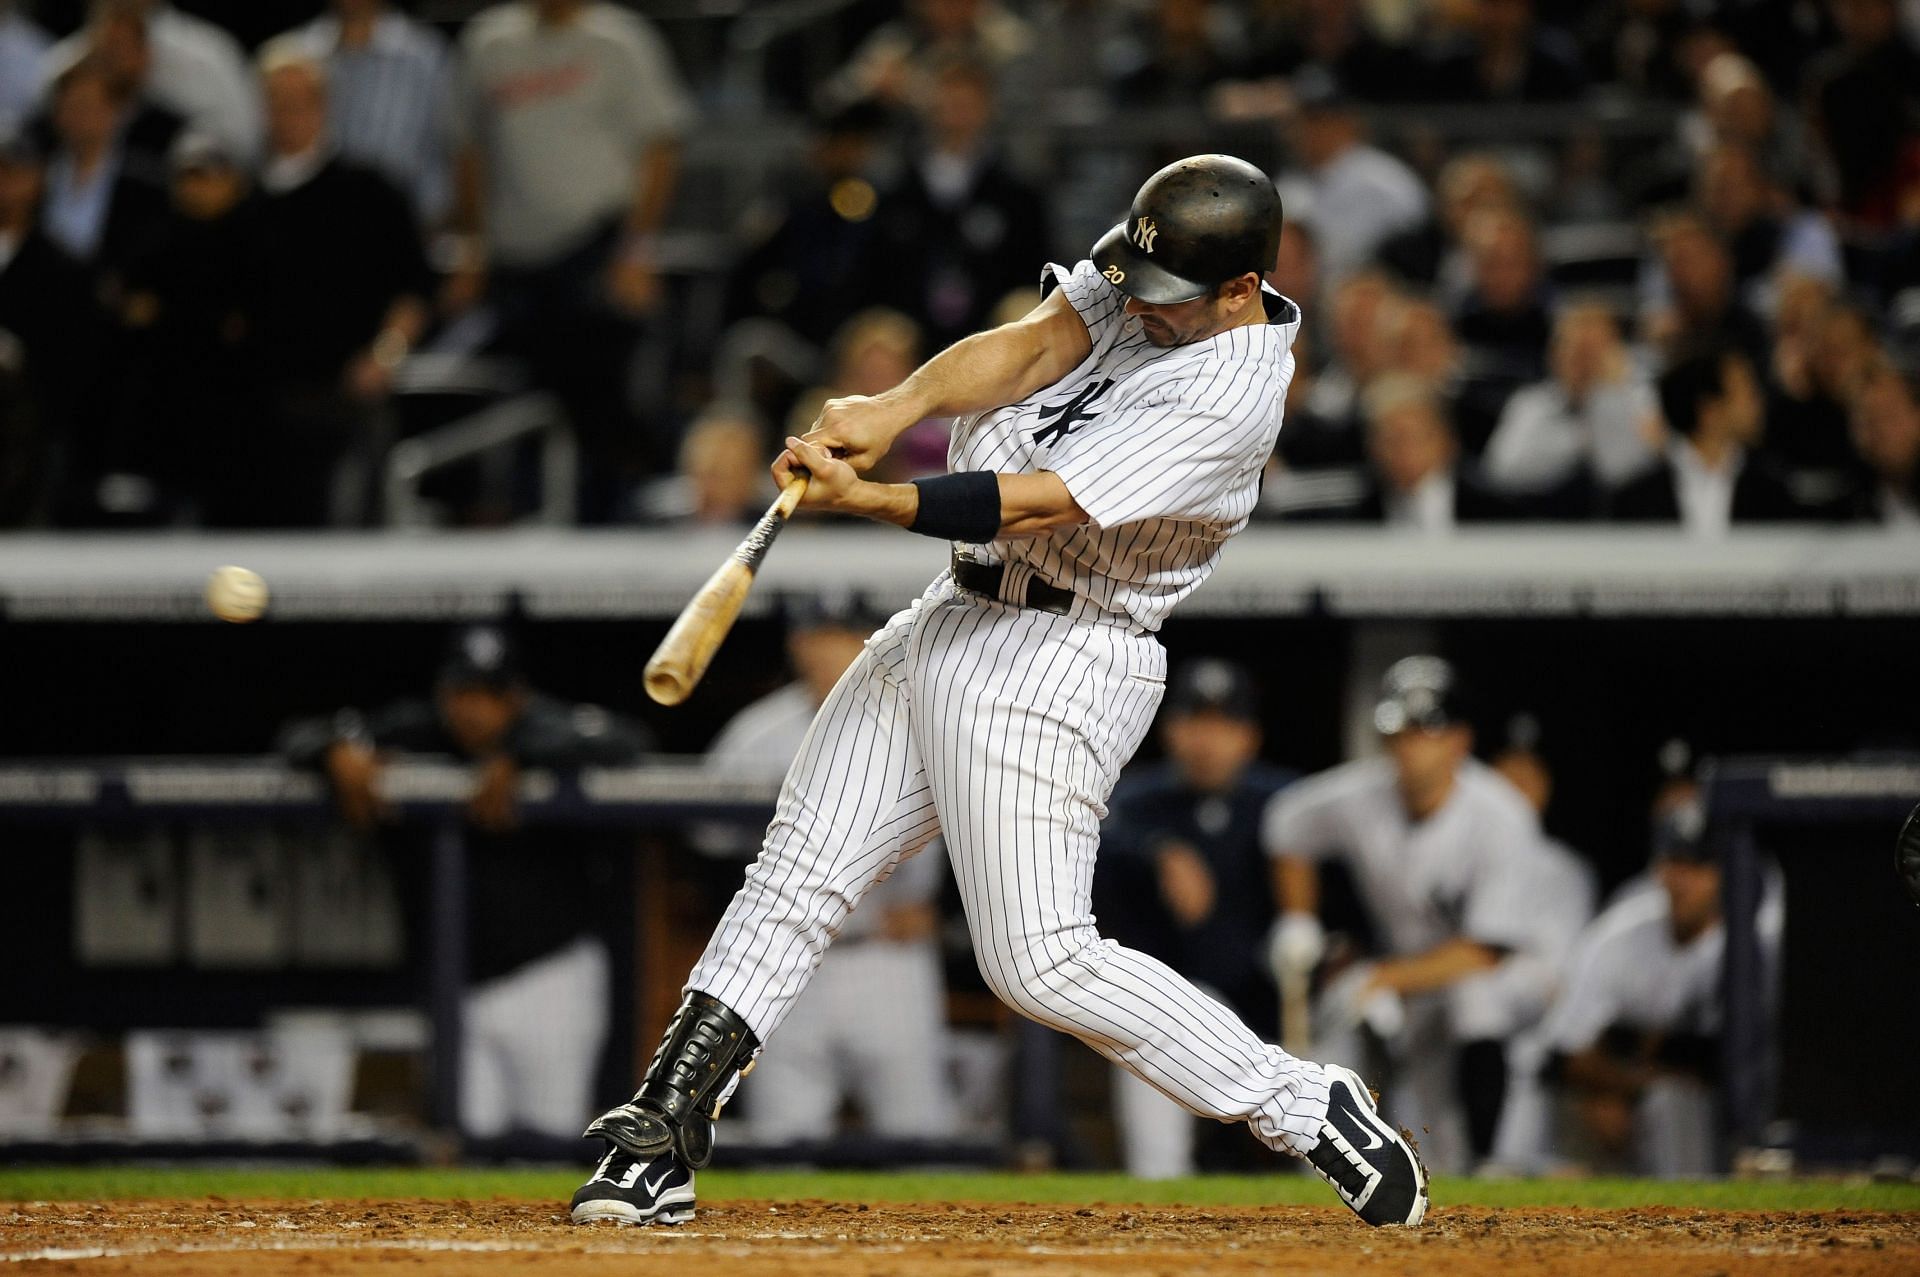 Catcher Jorge Posada Doesn't Expect to Return to the Yankees Next Year - WSJ